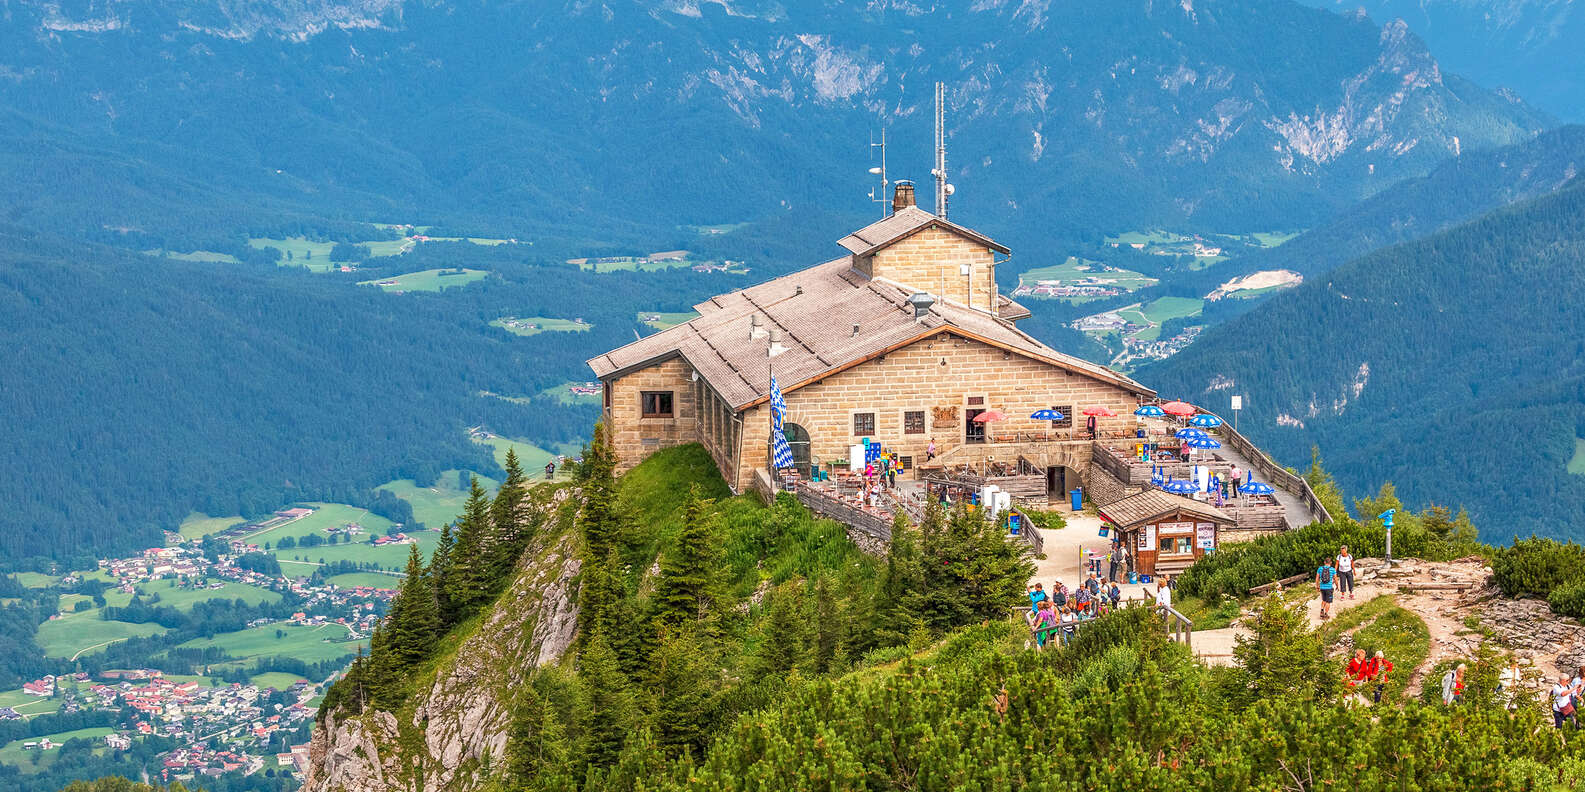 things to do in Berchtesgaden